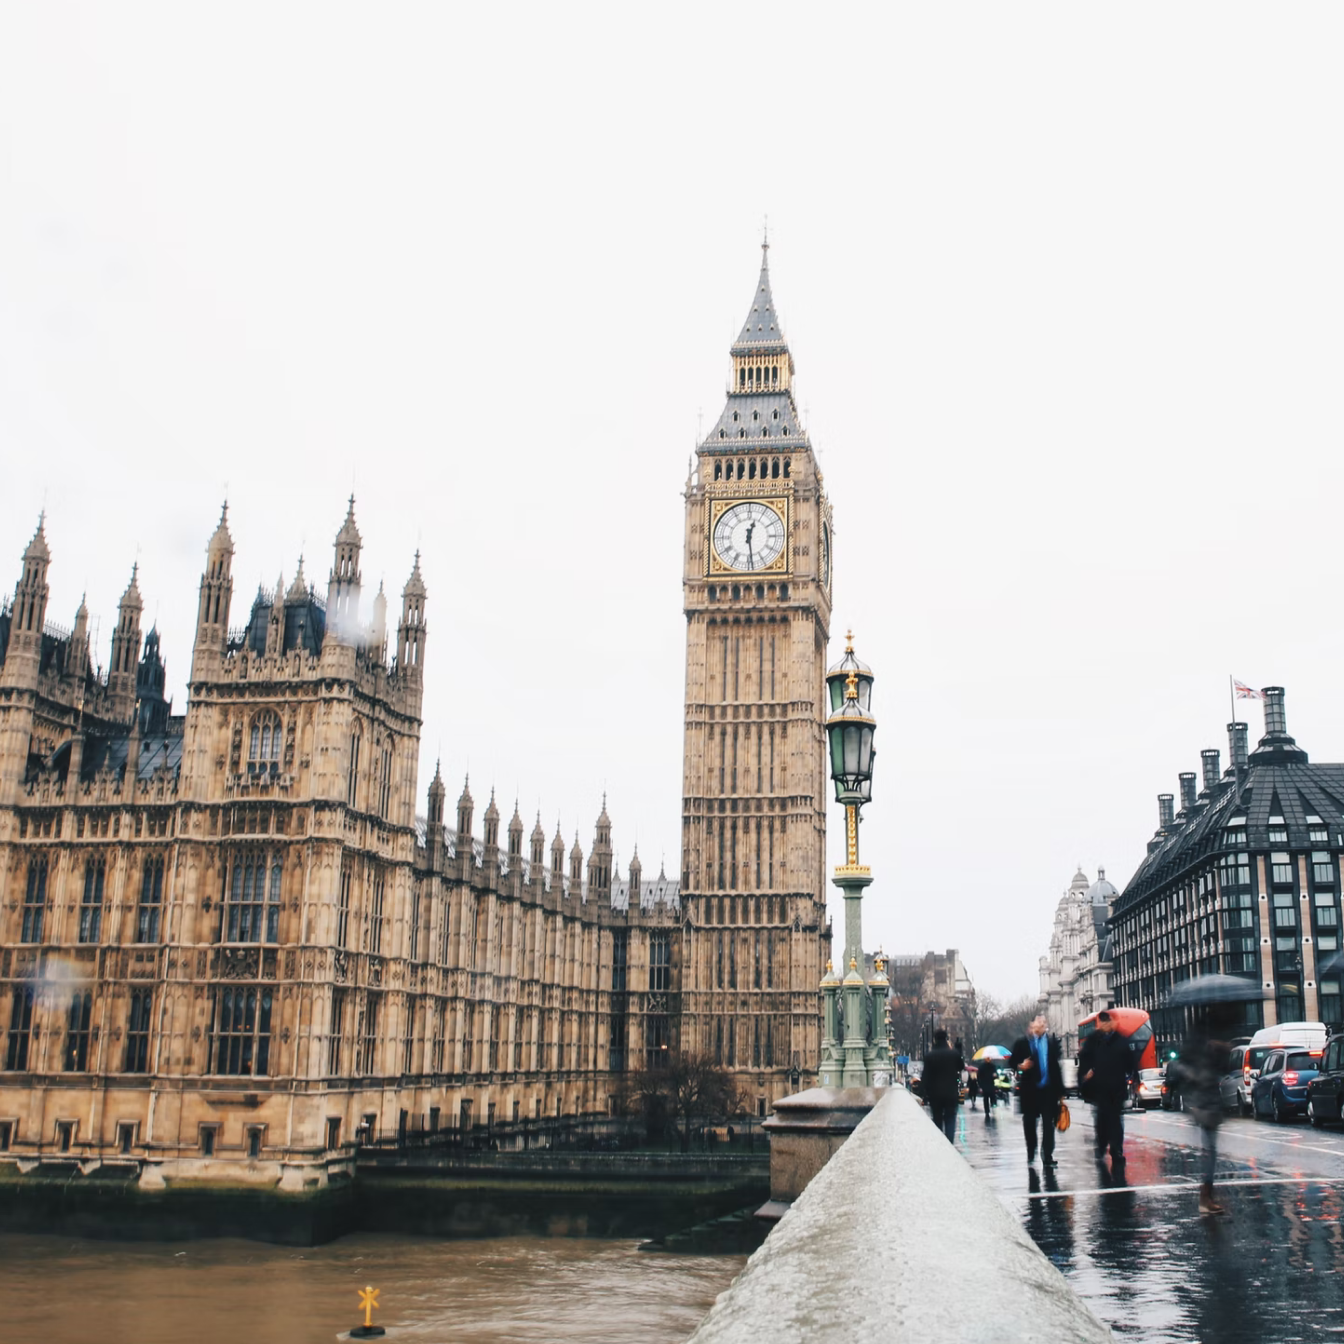 View of the Houses of Parliament and Big Ben clock tower and pedestrians from Westminster Bridge in London on a rainy day.